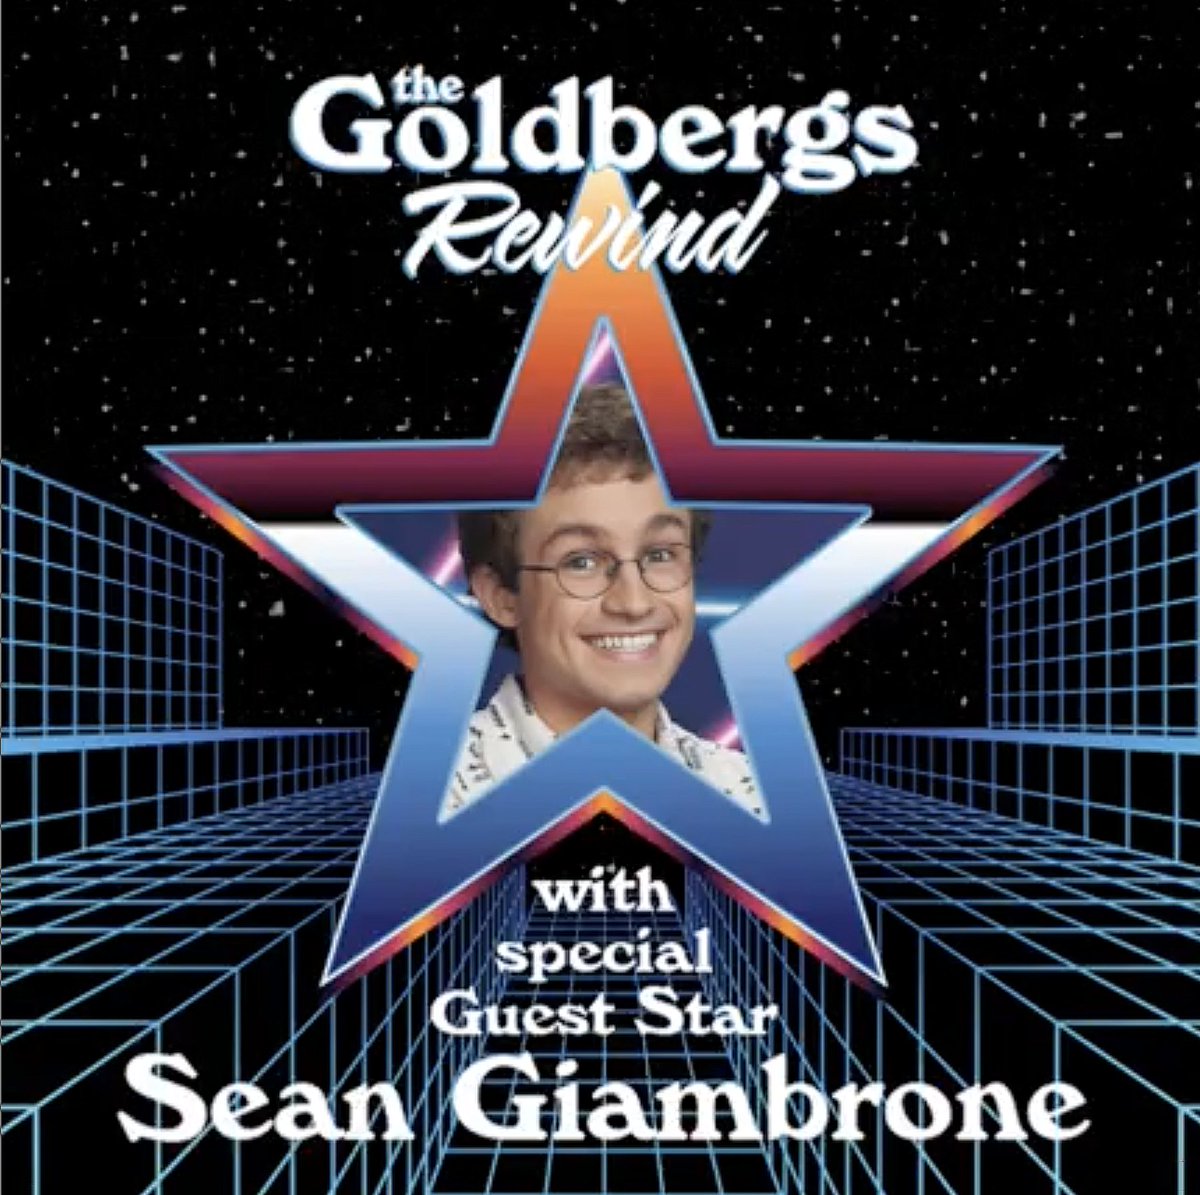 Today I'm discussing 'The Ring.' on #thegoldbergsrewind go to thegoldbergsrewind.com or anywhere you get podcasts! #thegoldbergs #thegoldbergsabc #1980something